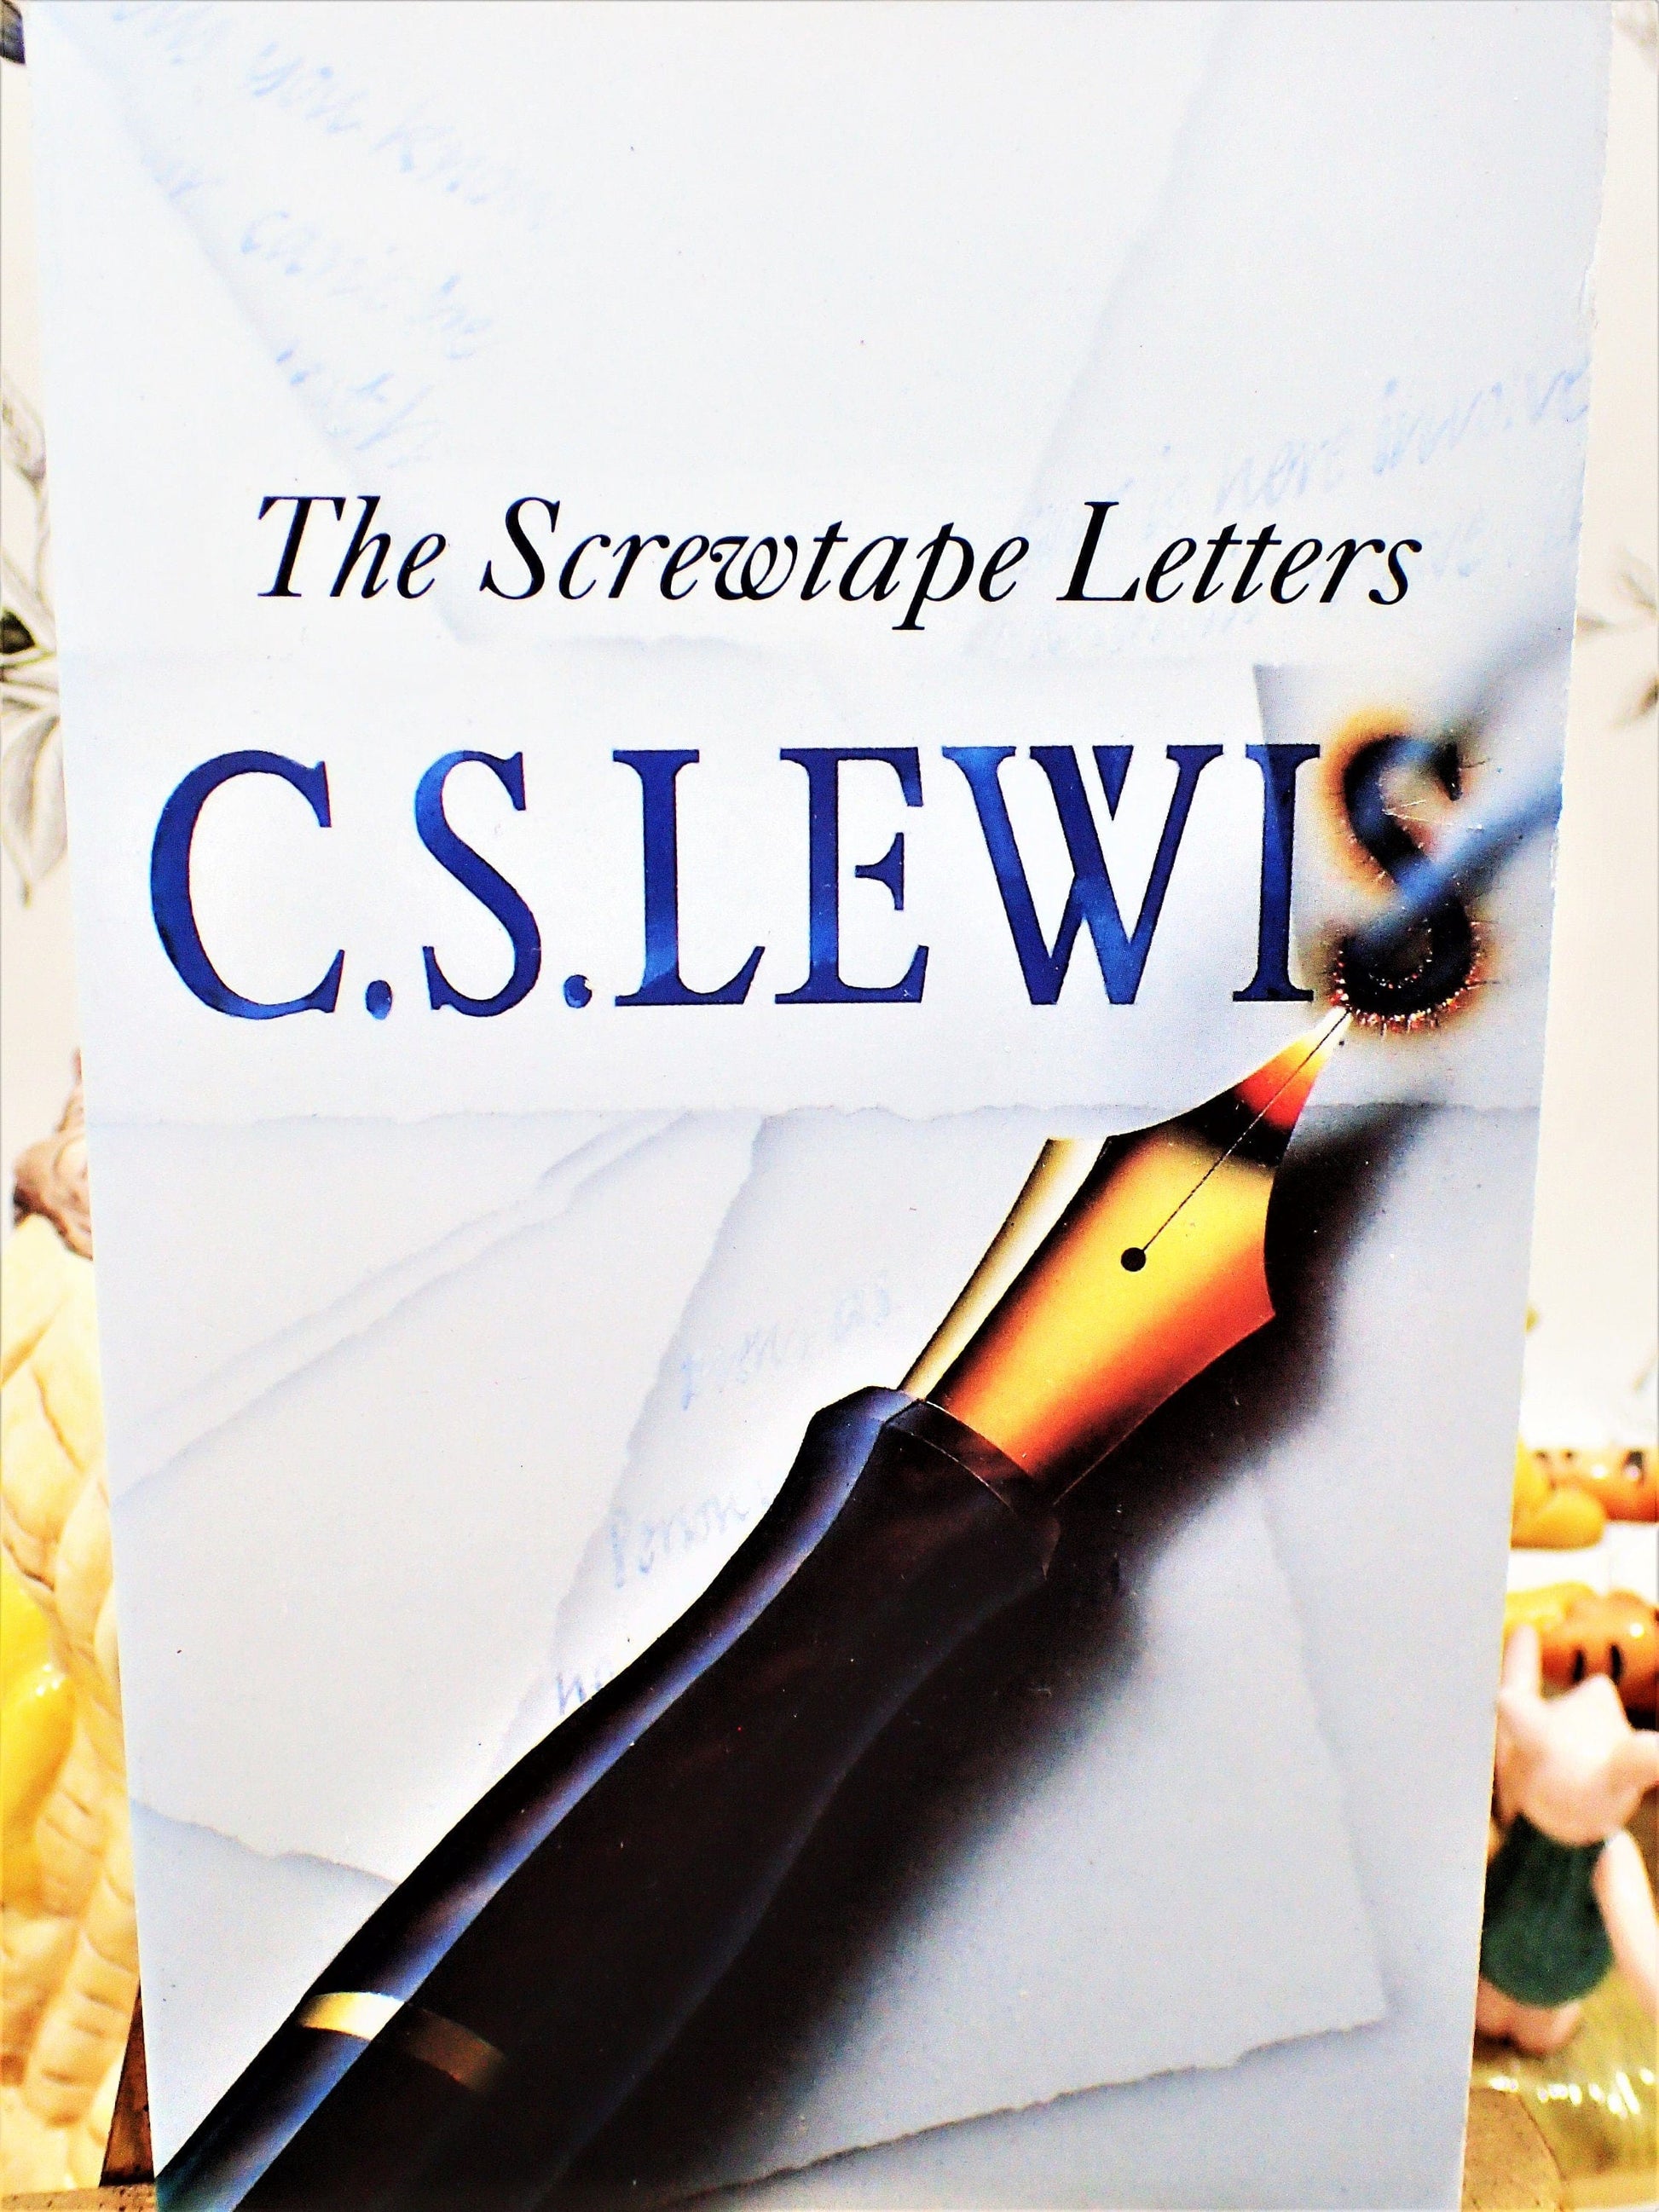 Front cover of The Screwtape Letters C S Lewis Vintage Paperback Book 1970's showing a pen with its ink burning through the paper. 